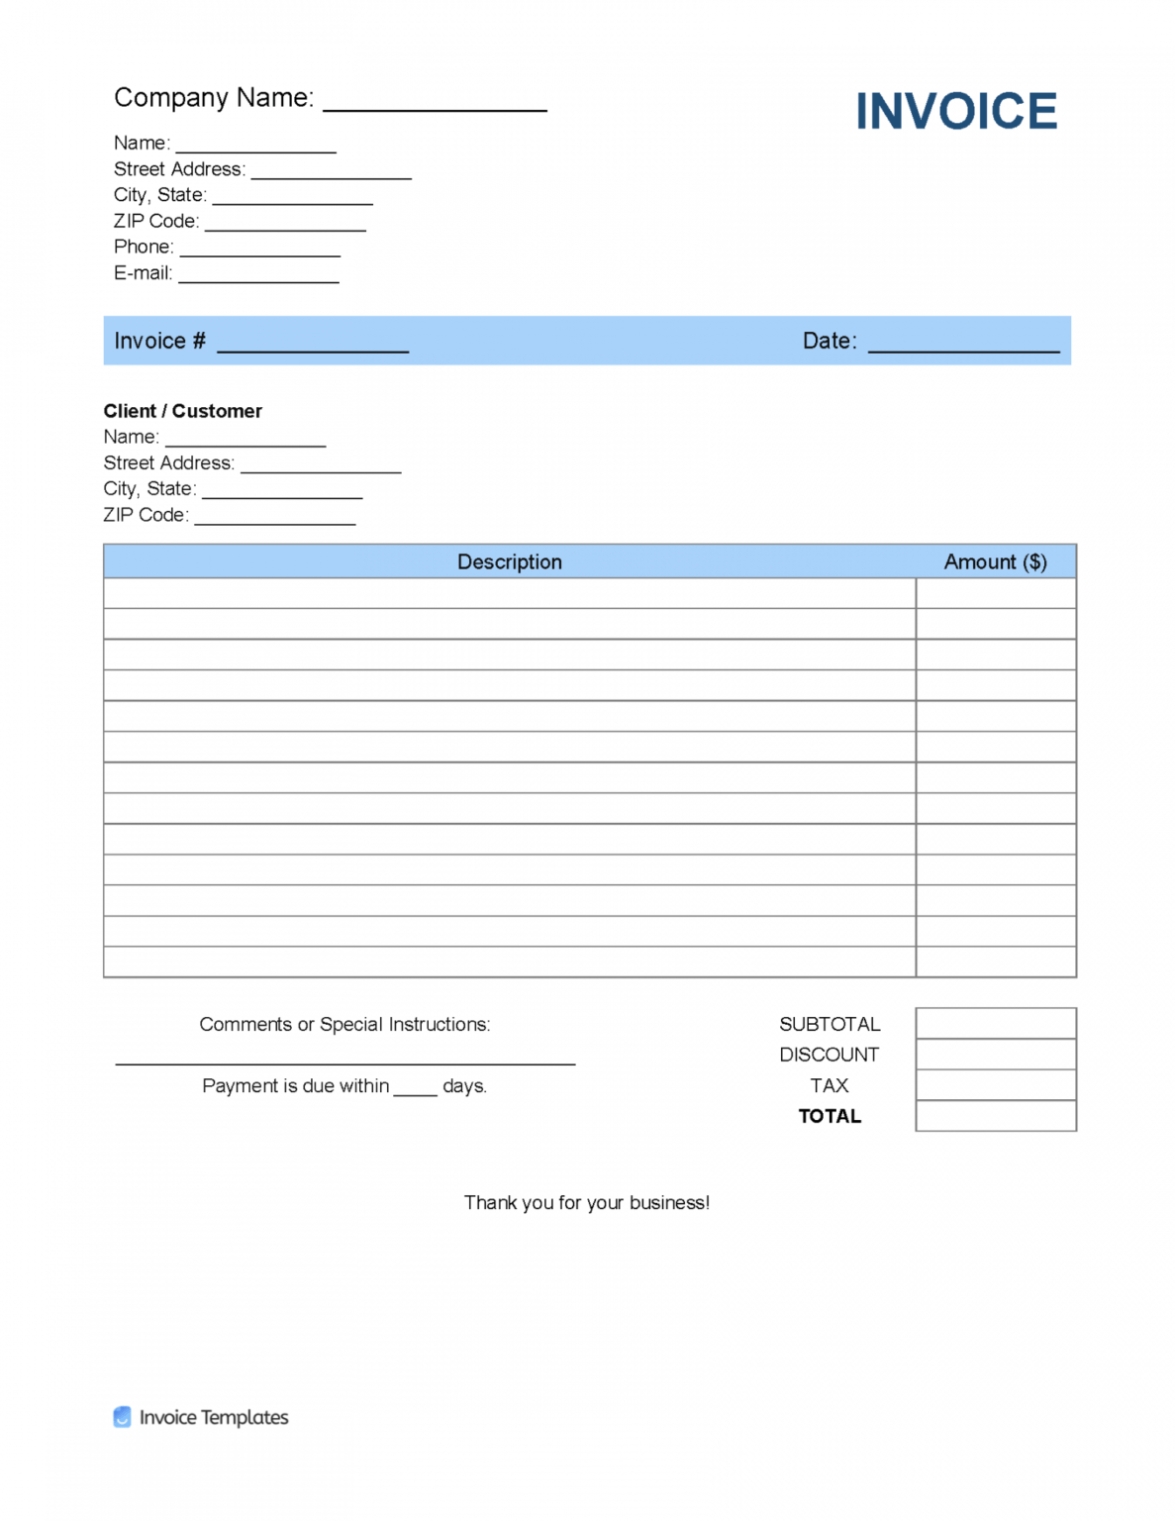 Editable Free Blank Invoice Templates In Pdf Word &amp; Excel Fillable Cash Receipt Template in I Need An Invoice Template